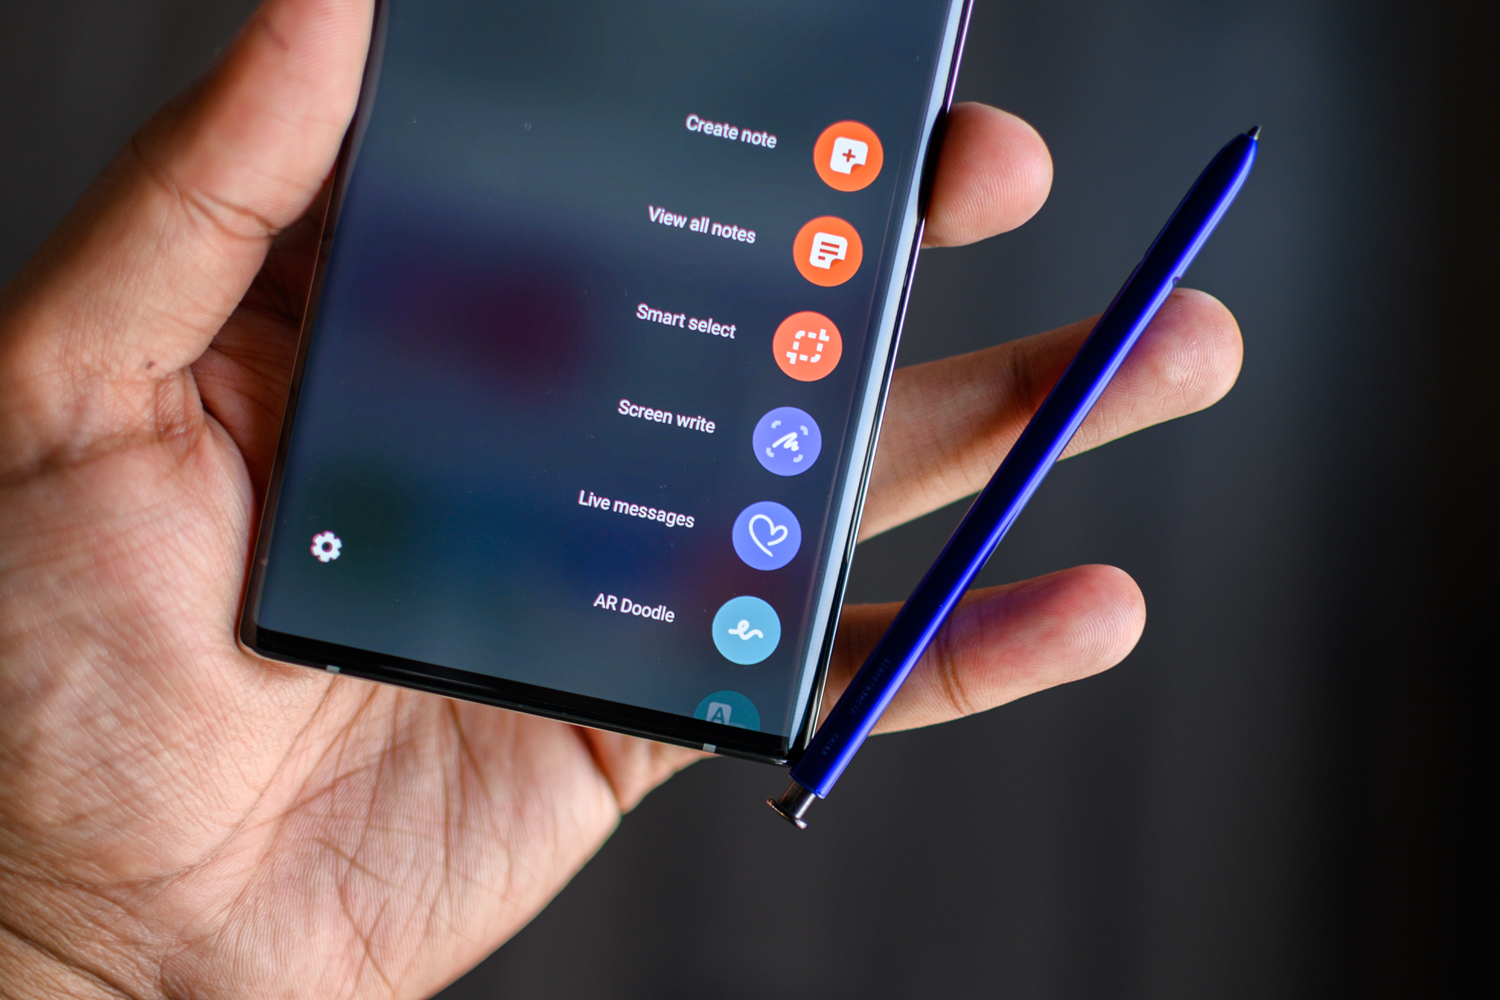 Galaxy Note 10, Note 10 Plus, and Note 10 Plus 5G: Prices and everything  you need to know